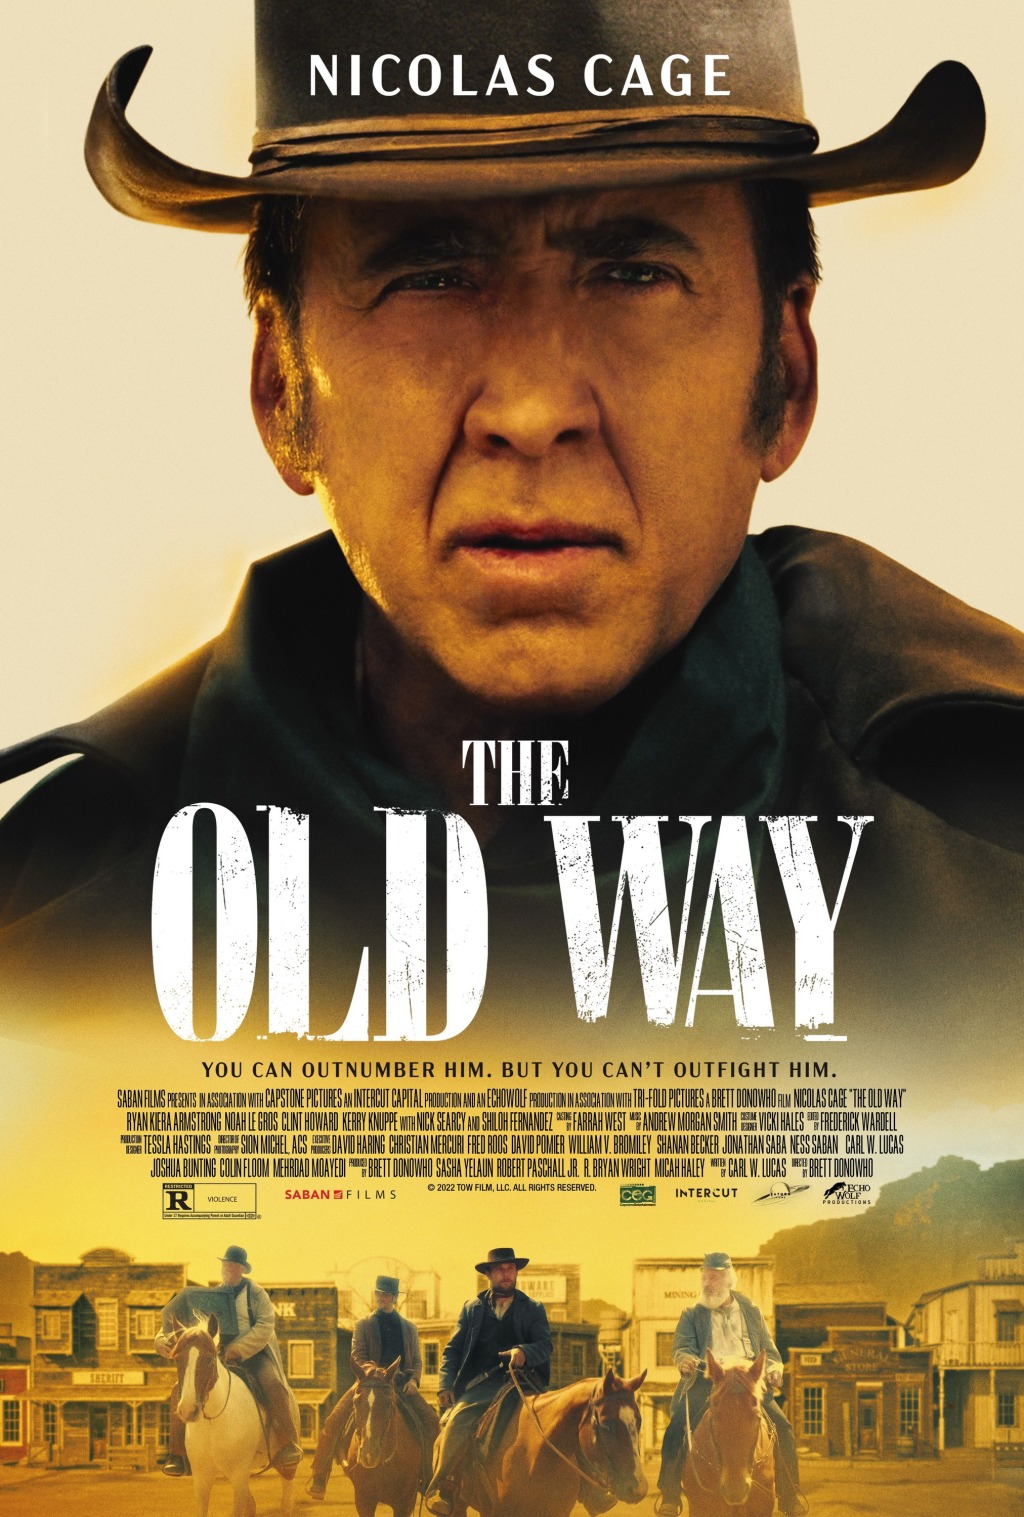 FILM: NICOLAS CAGE IS BACK IN “THE OLD WAY”